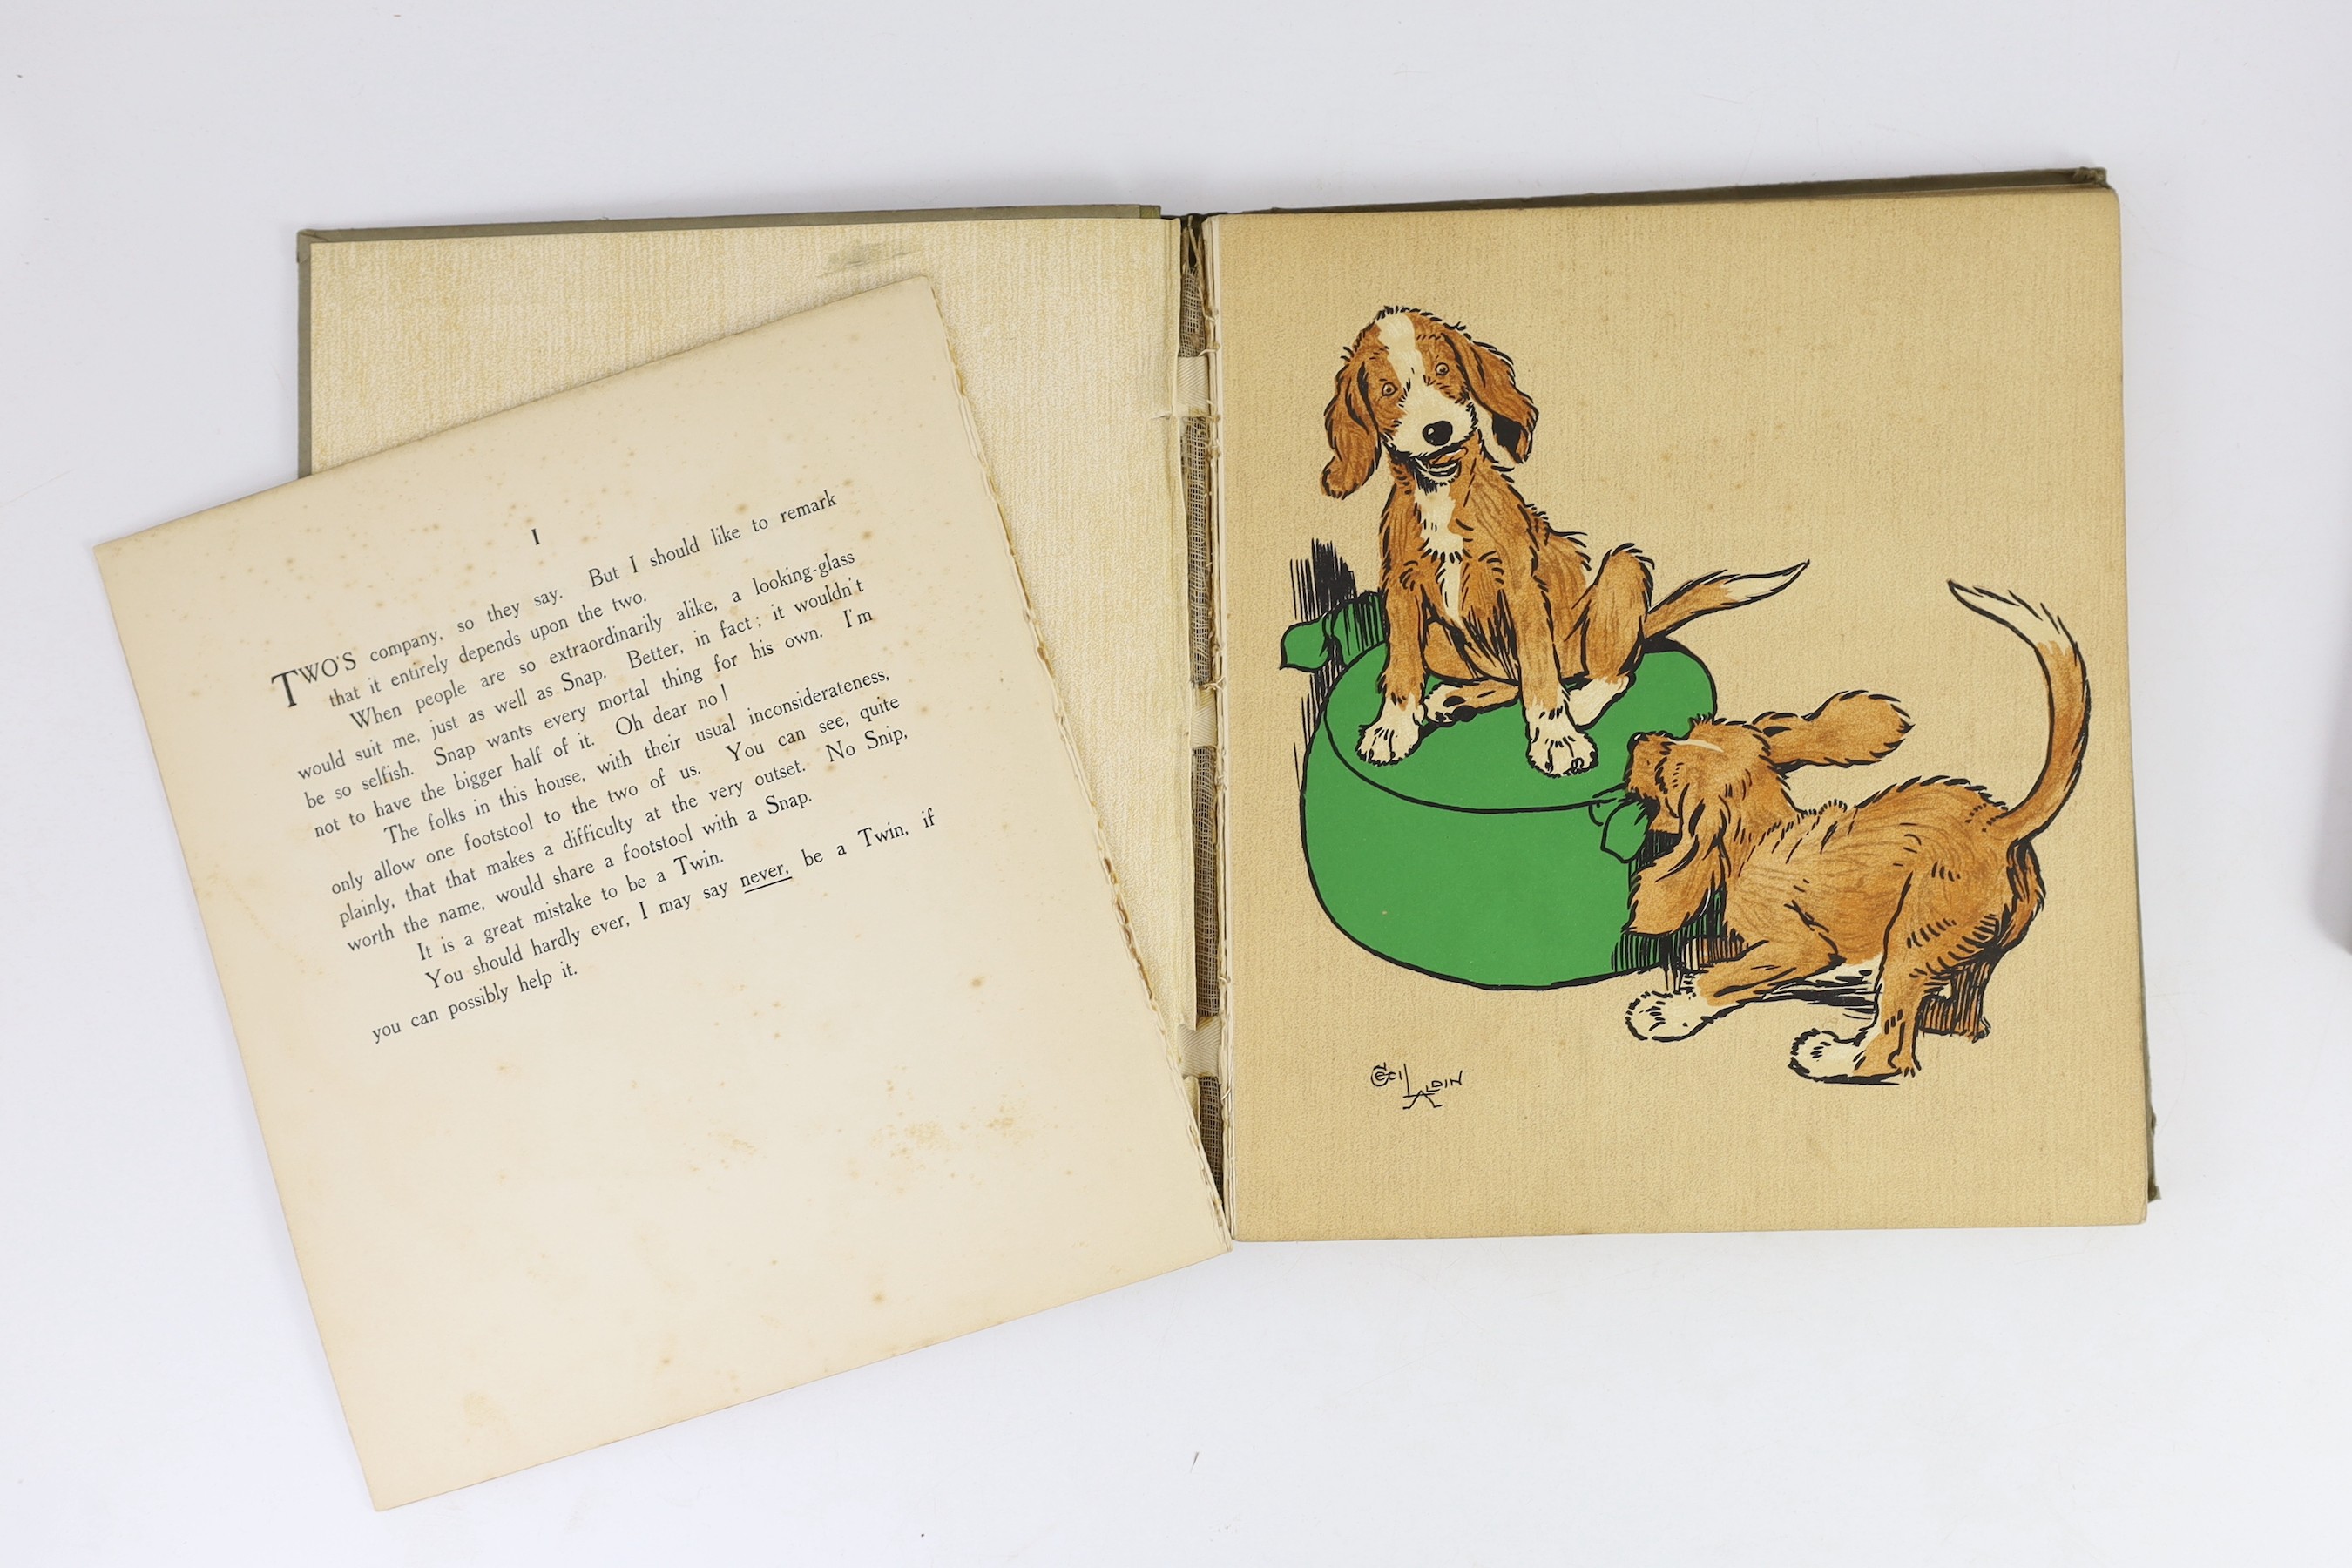 Aldin, Cecil - 3 works - Puppy Tails, 10 plates, 1912; Rough and Tumble, 24 plates, [1910] and The Twins, 24 plates, [1910]